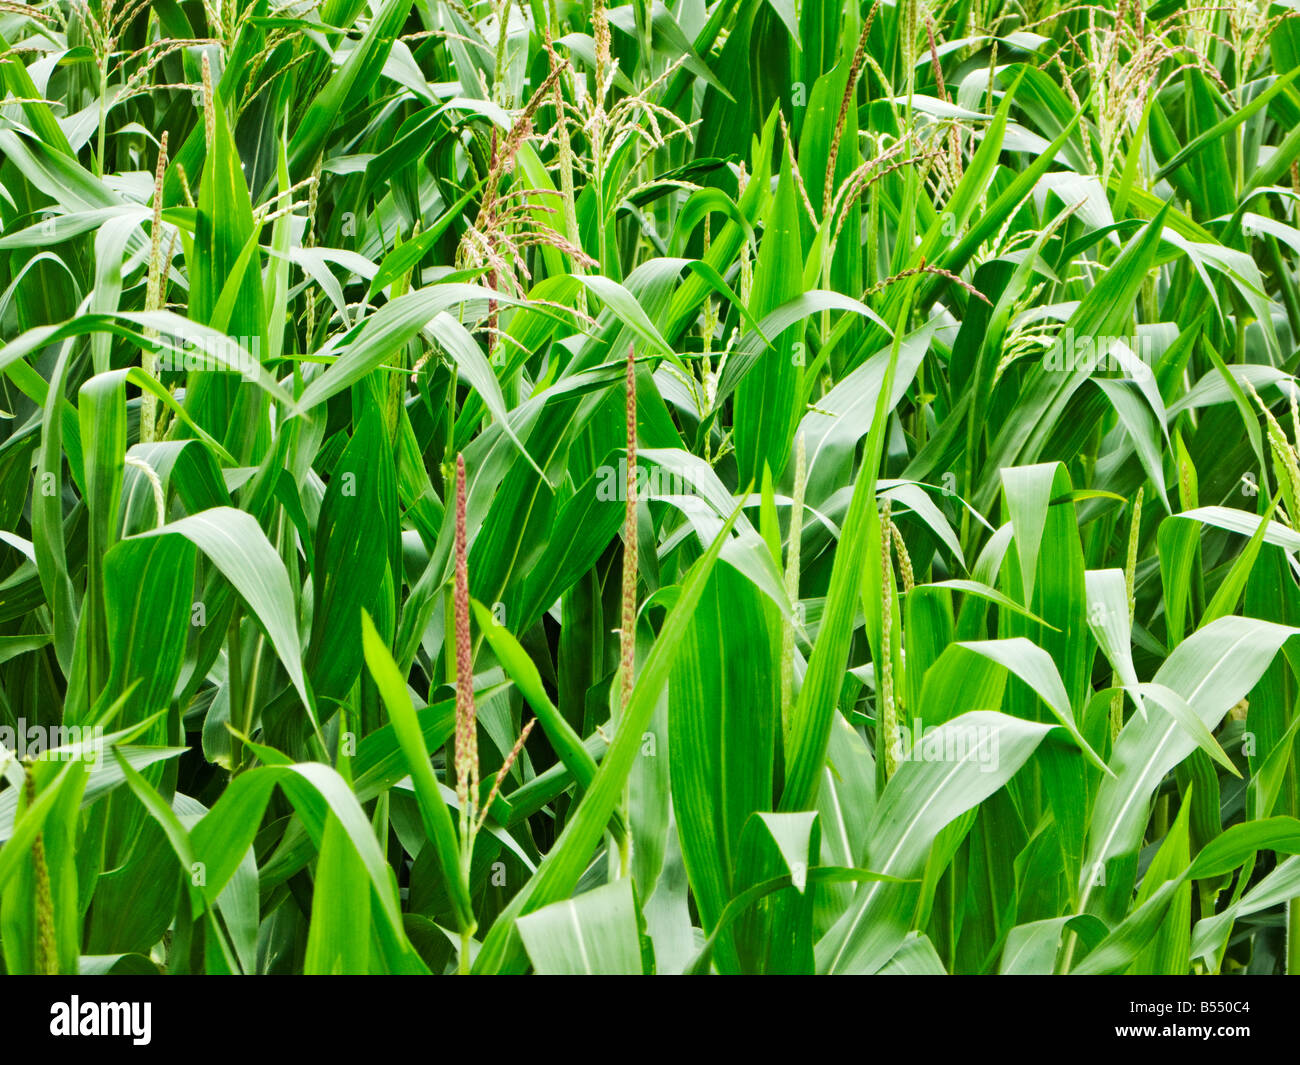 Maize plants in summer Stock Photo